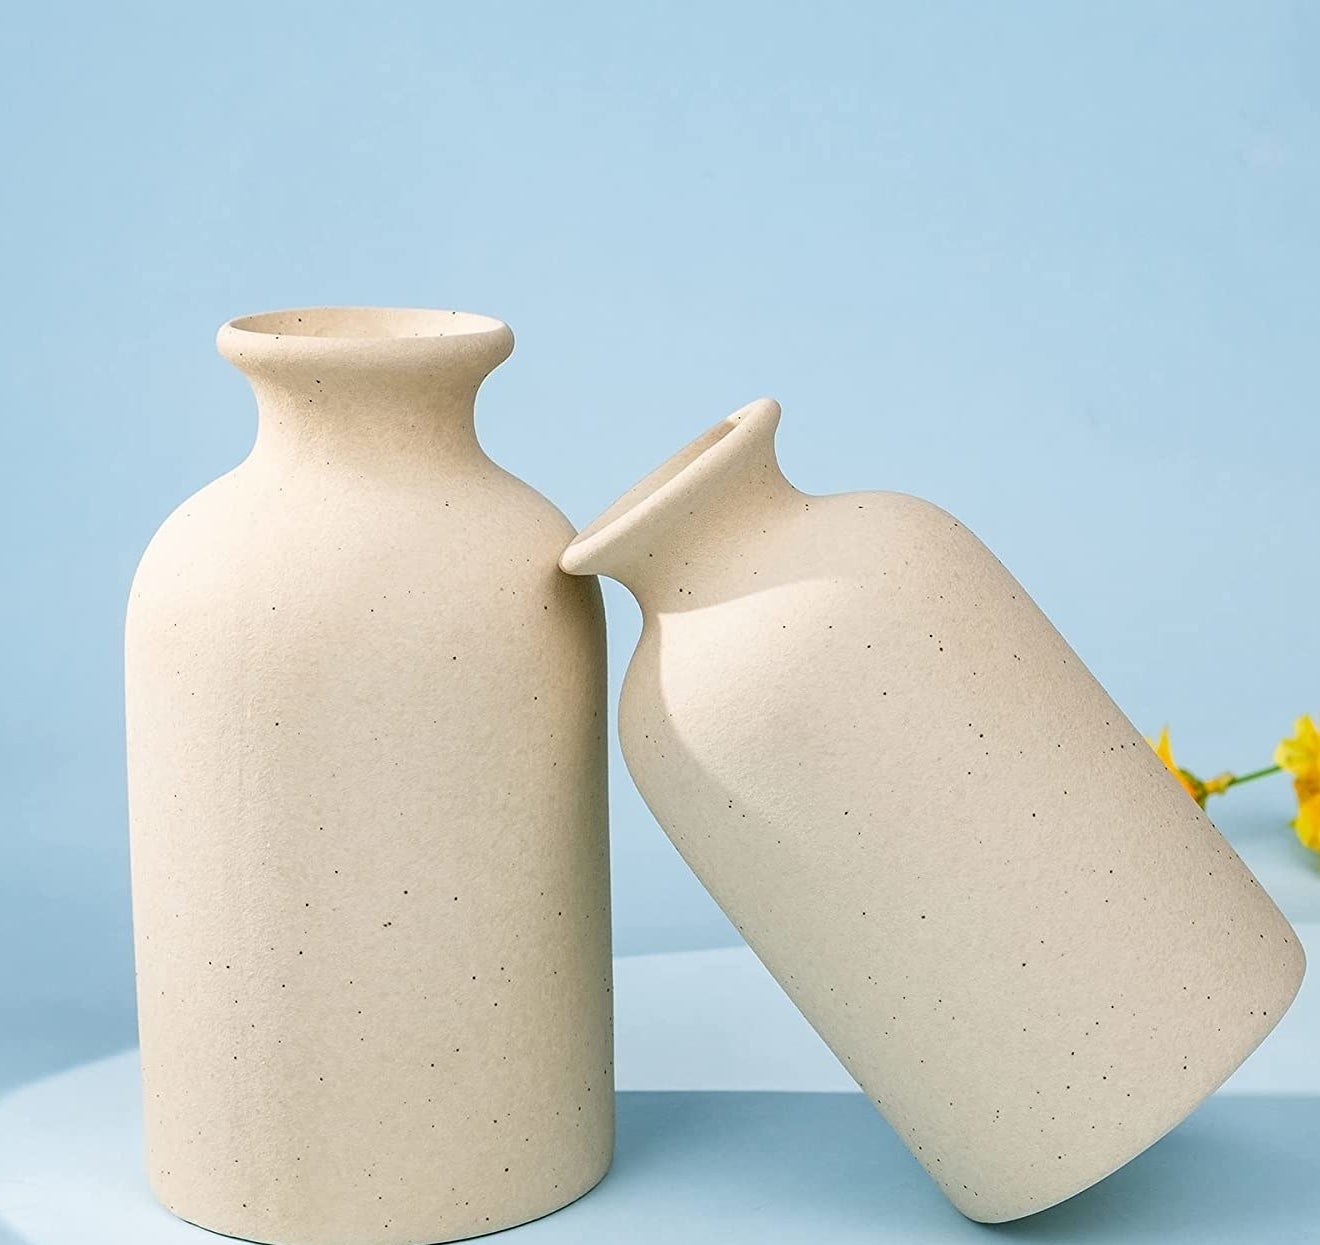 the two vases, one leaning on the other